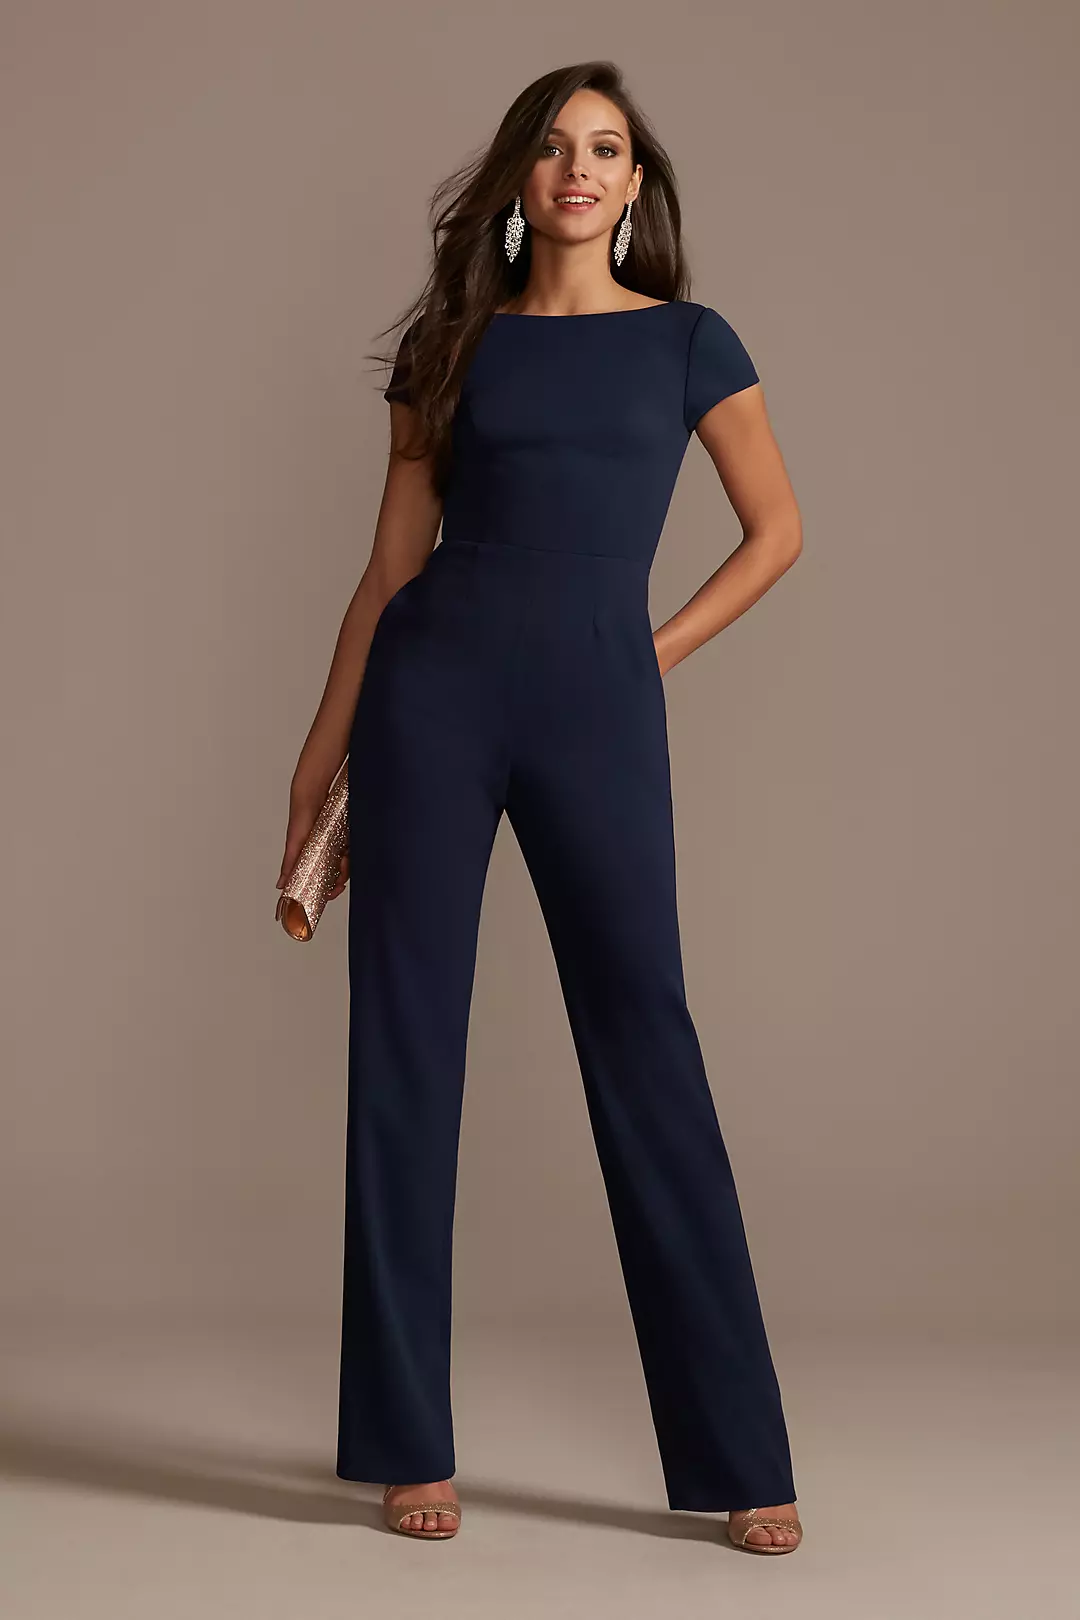 Short Sleeve Stretch Crepe Jumpsuit with Open Back Image